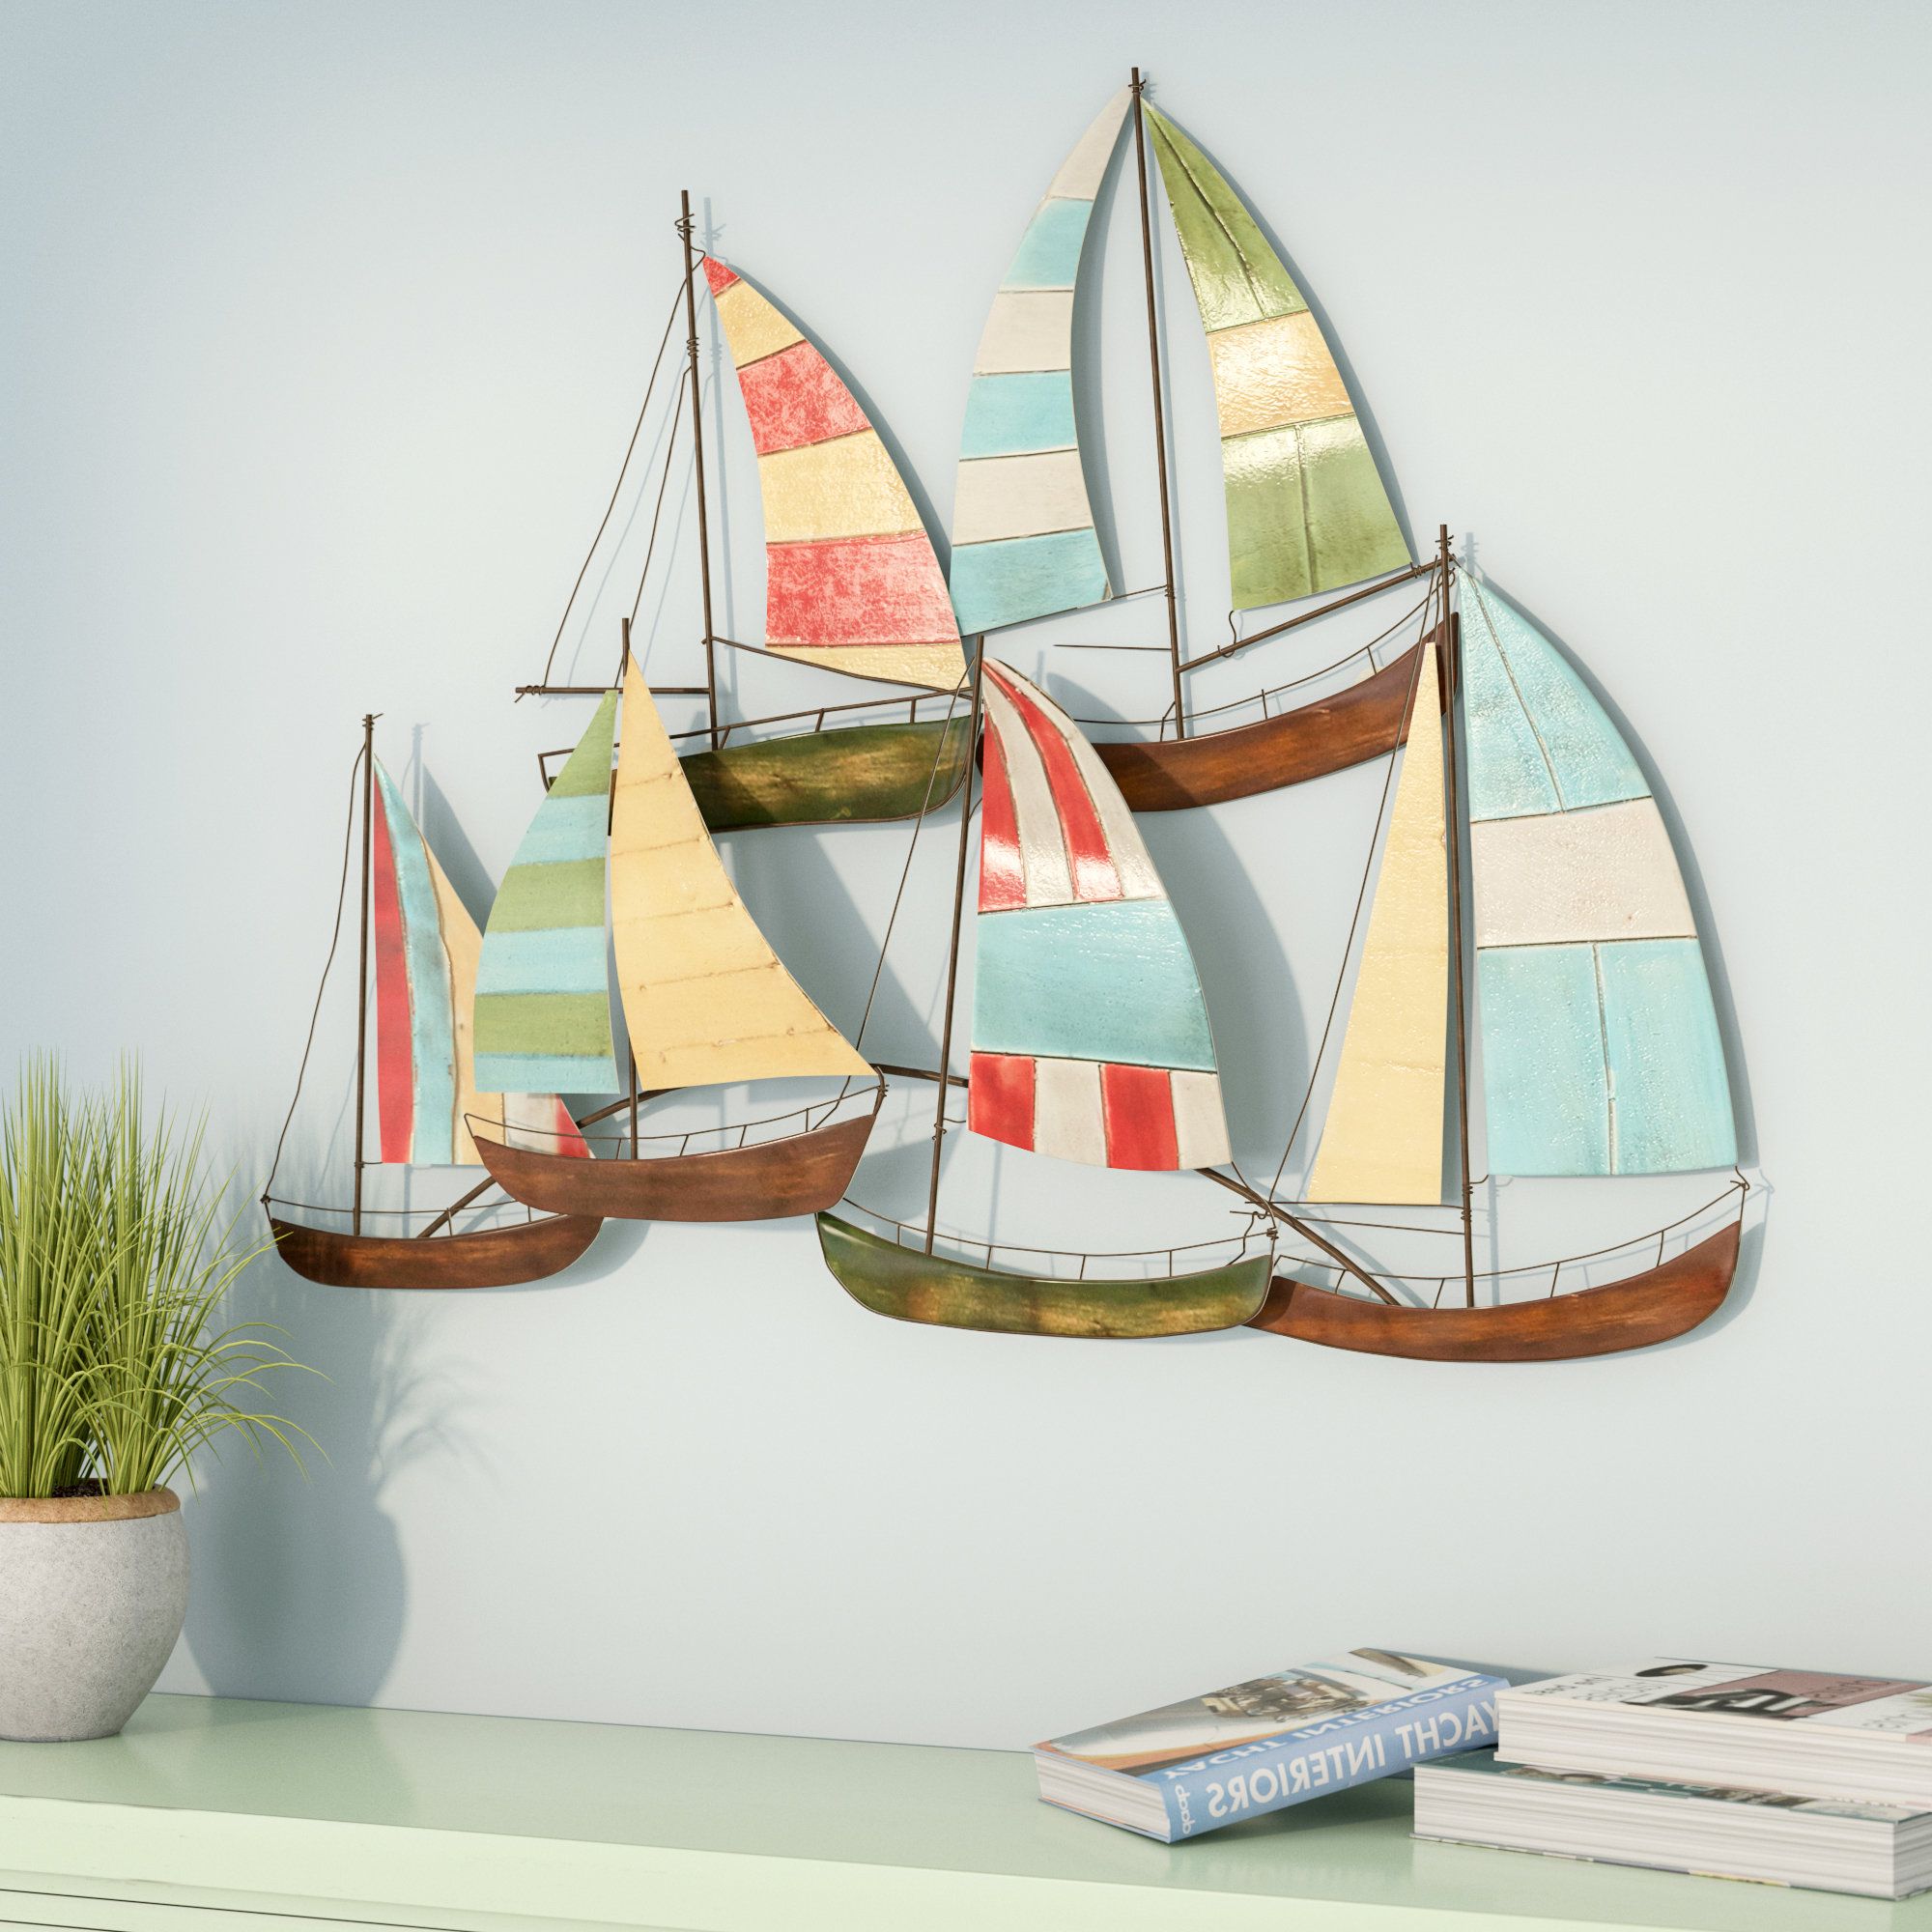 Trendy Metal Alloy Boat Wall Decor Within Beachcrest Home Metal Alloy Boat Wall Decor & Reviews (View 1 of 20)